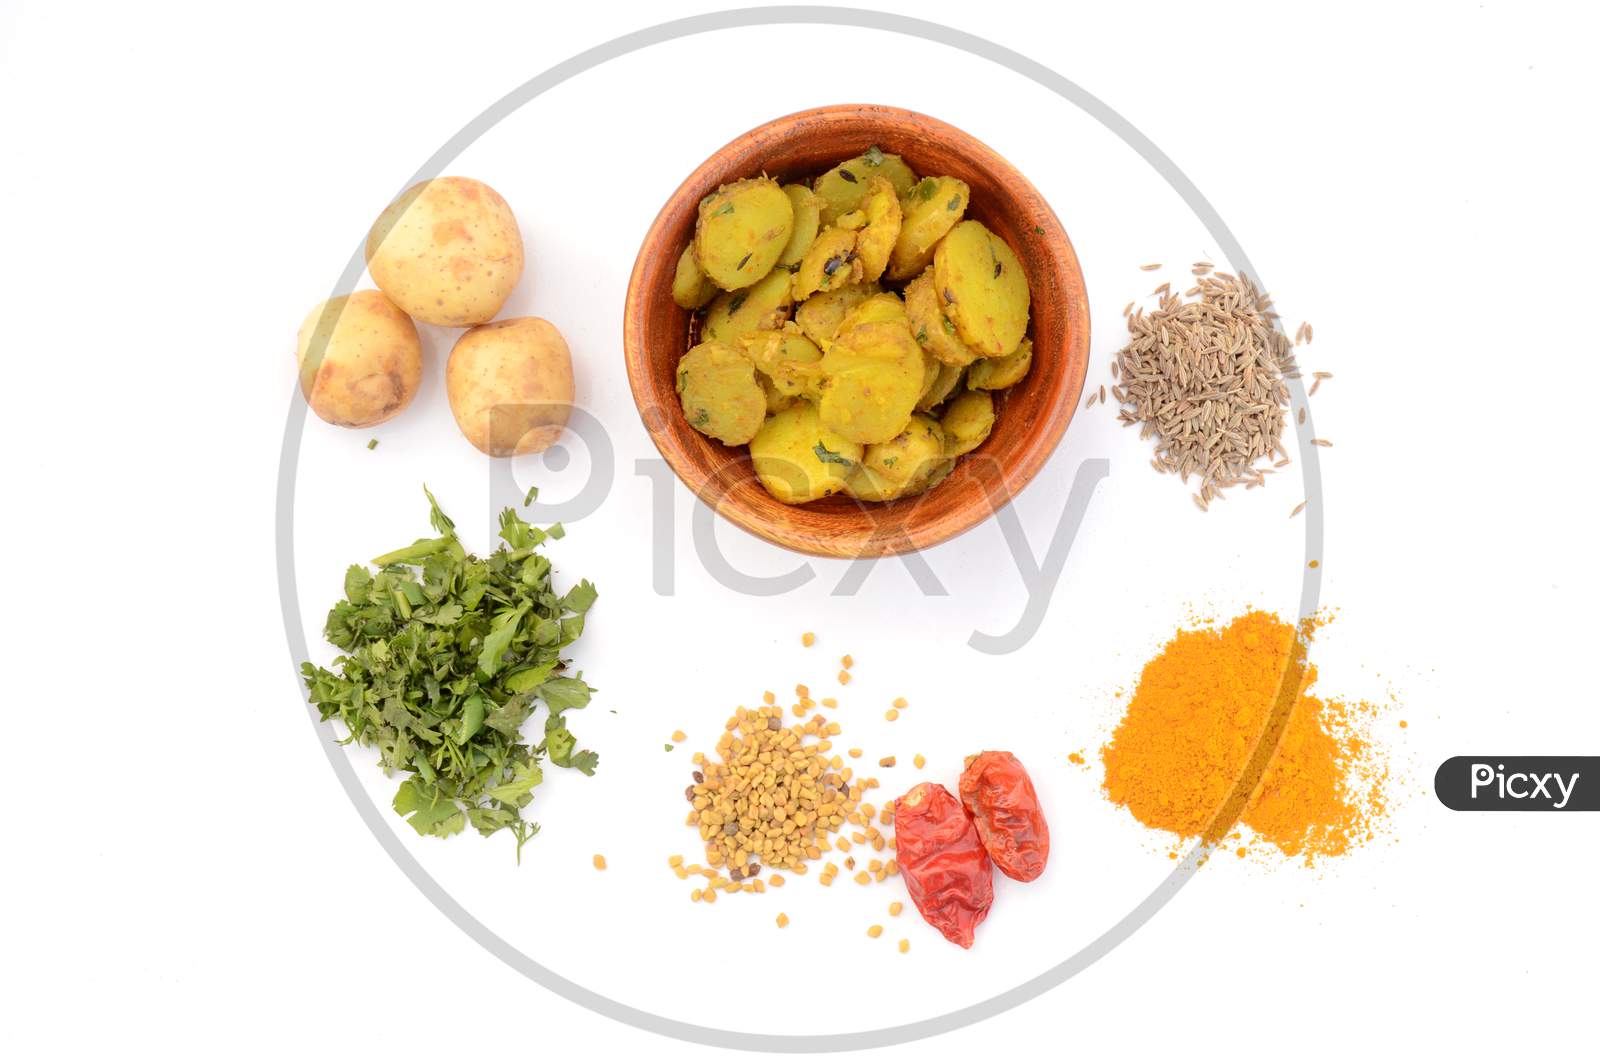 Potato Vegetable Made For With Potato, Coriander, Anise, Turmeric, Chilly, Greek, Isolated On White Background.